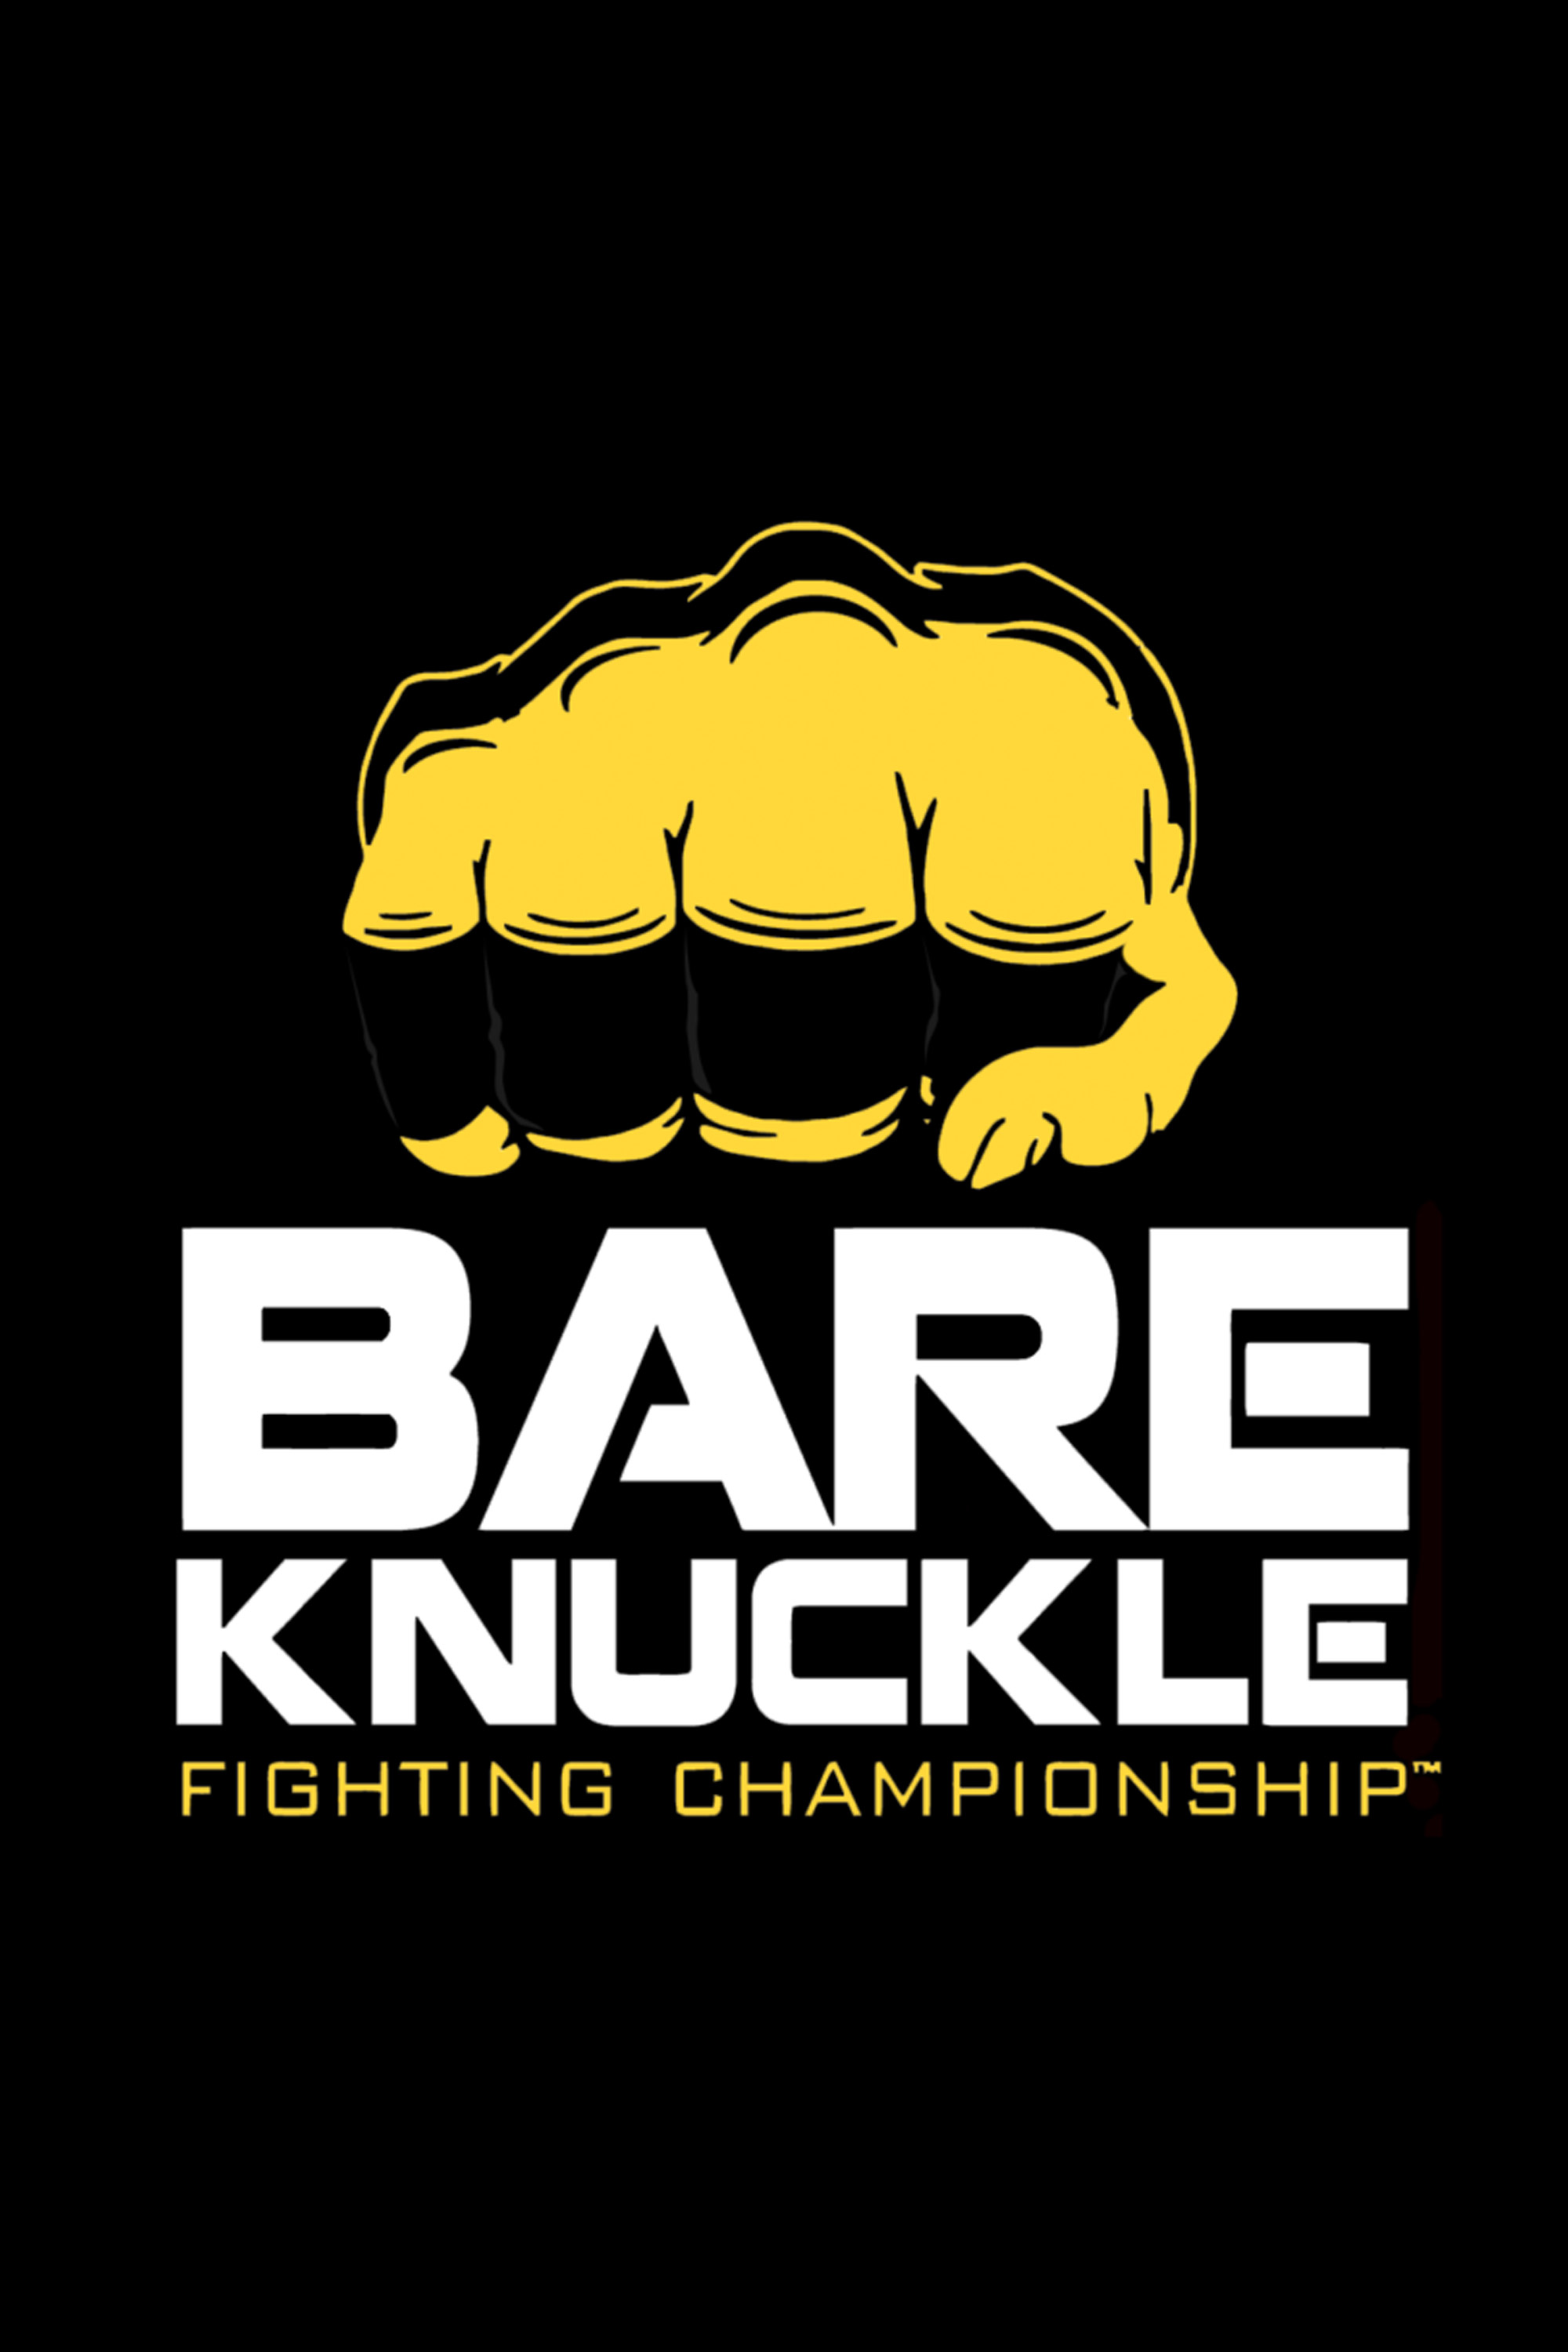 Bare Knuckle Fighting Championship - Where to Watch and Stream